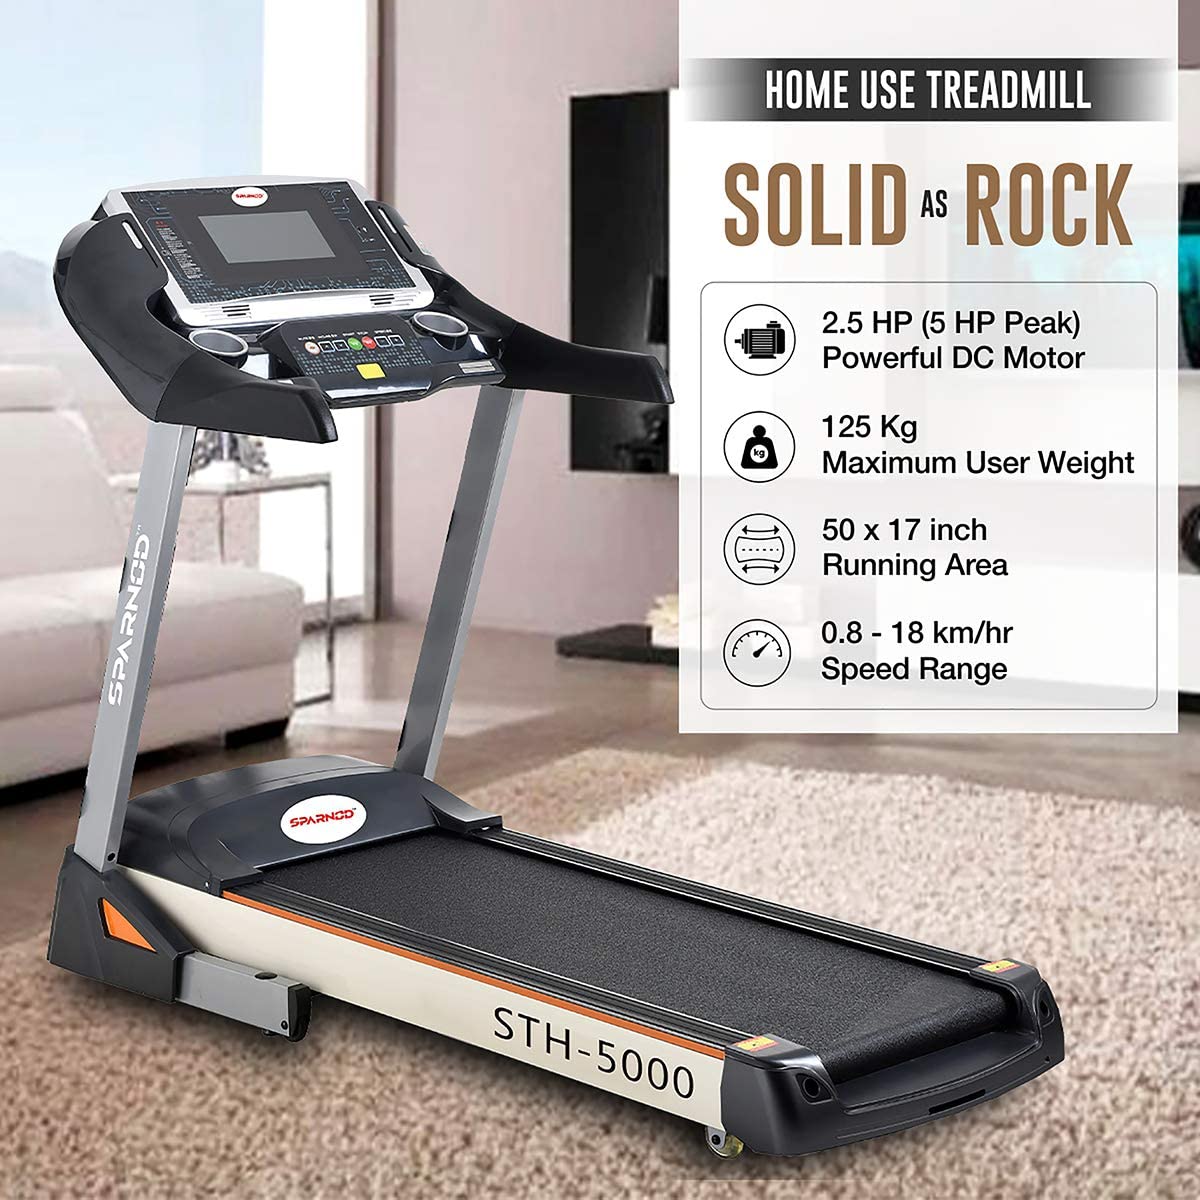 Sparnod Fitness Treadmill Automatic STH 5000 5 HP Peak Free Installation Service – Foldable Motorized Treadmill for Home Use2